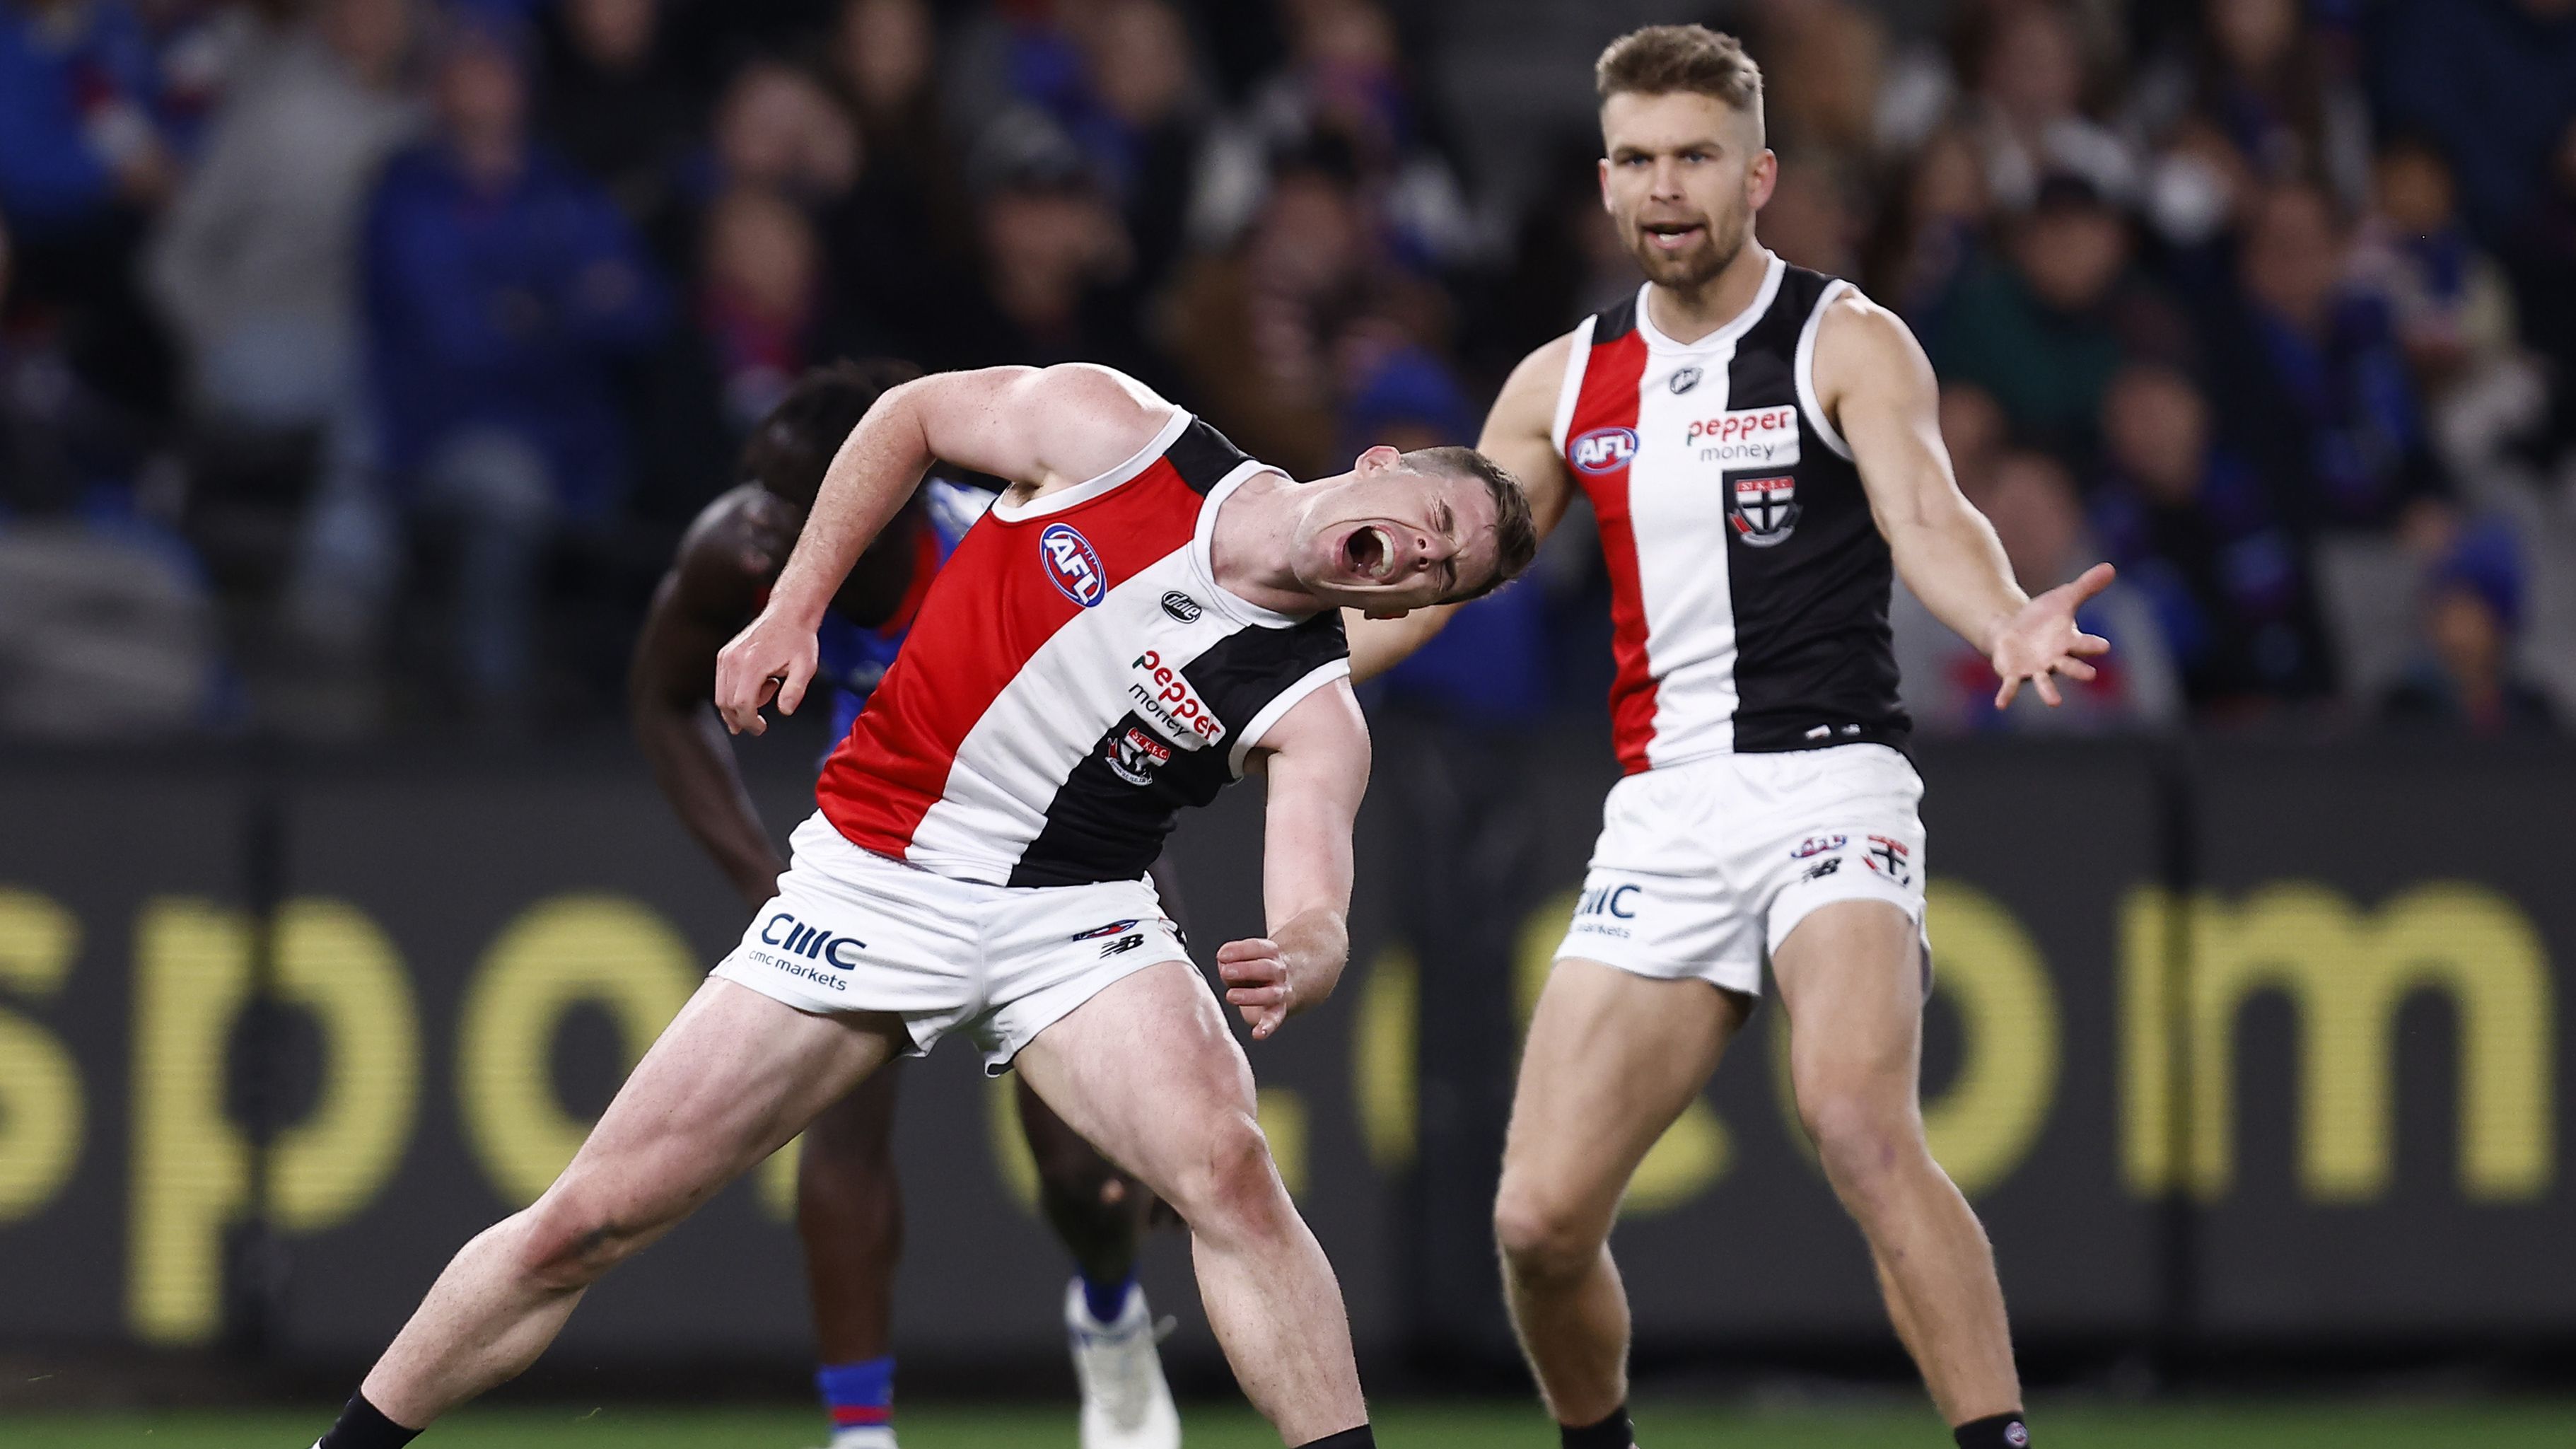 'Fraudulent' St Kilda reeling after dismal loss to Western Bulldogs